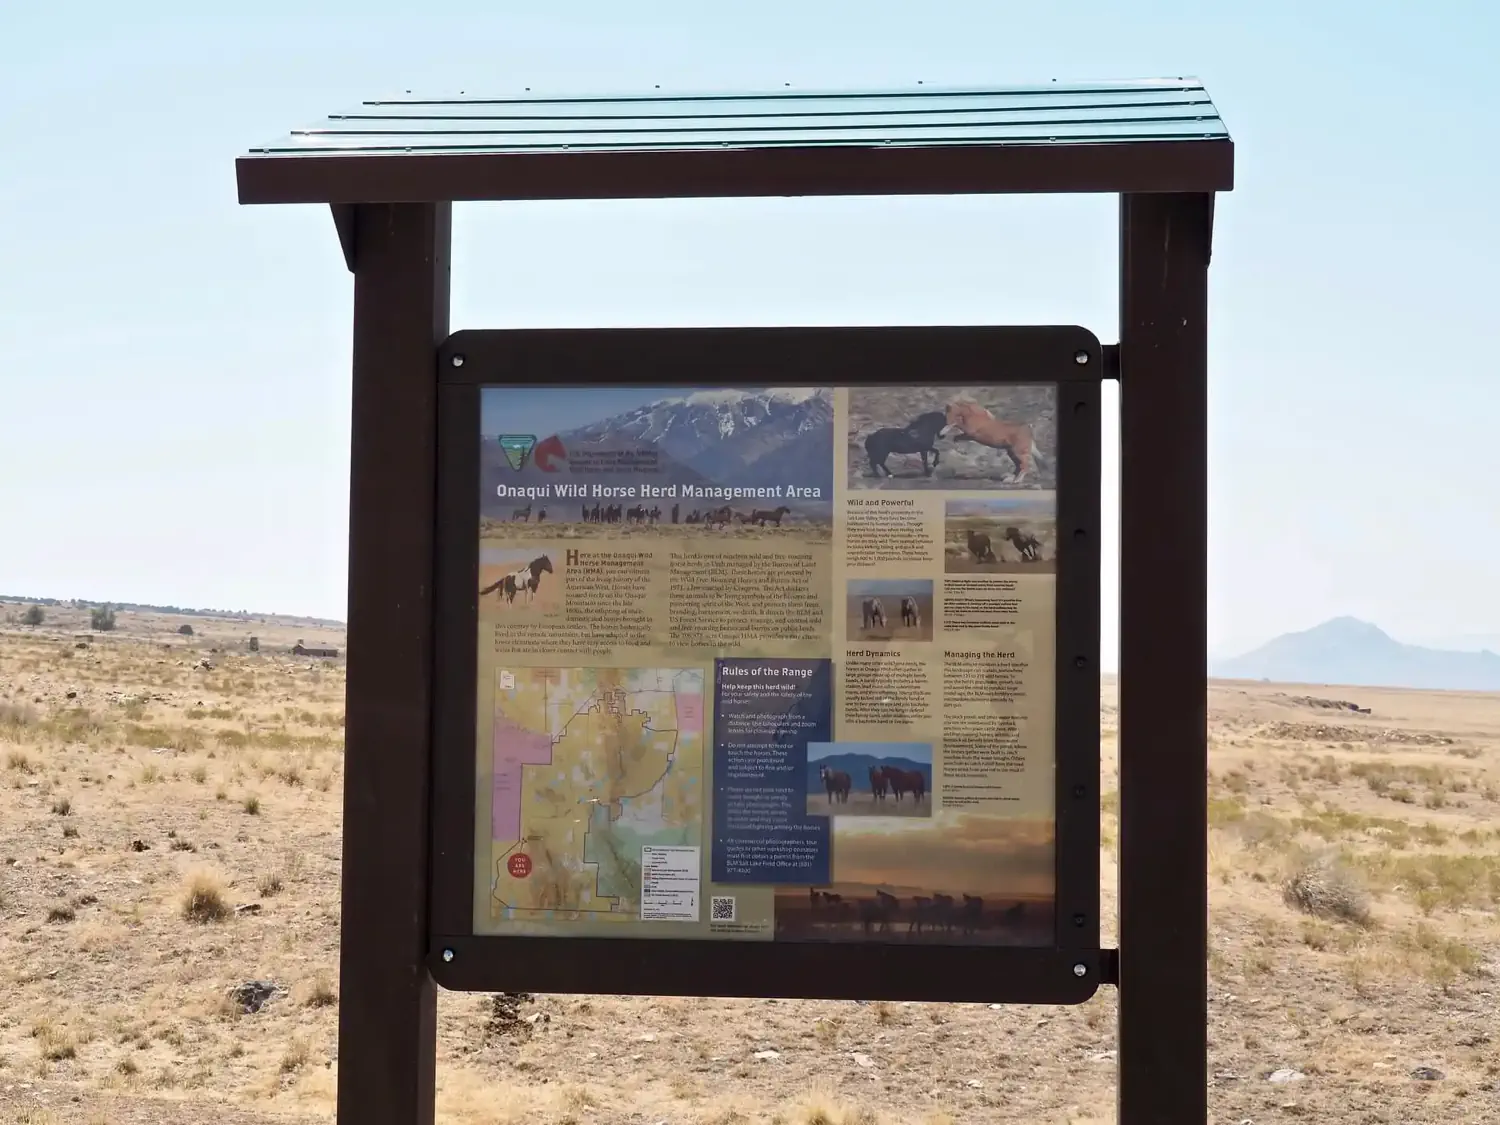 A trail sign describing the groups of wild horses in the area